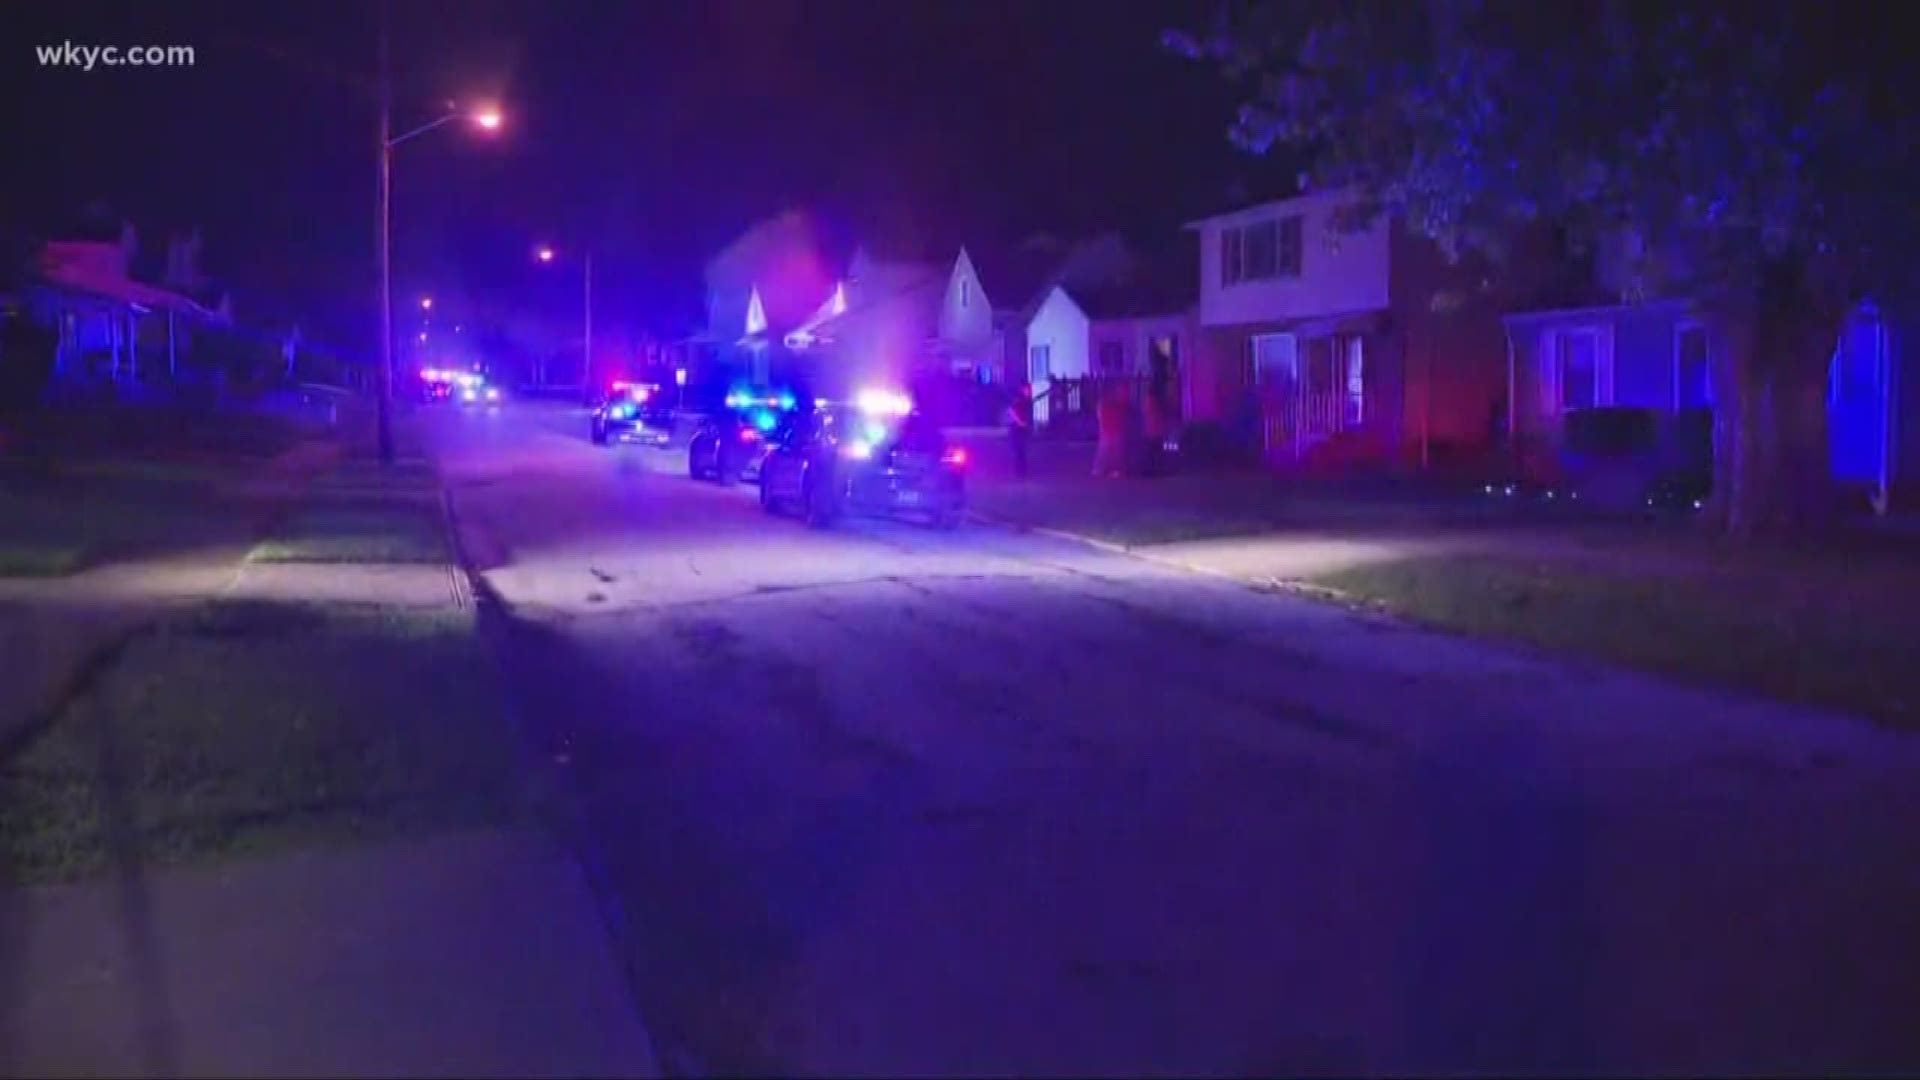 Sept. 6, 2018: A 17-year-old boy and a 19-year-old girl were killed in a deadly domestic shooting overnight.